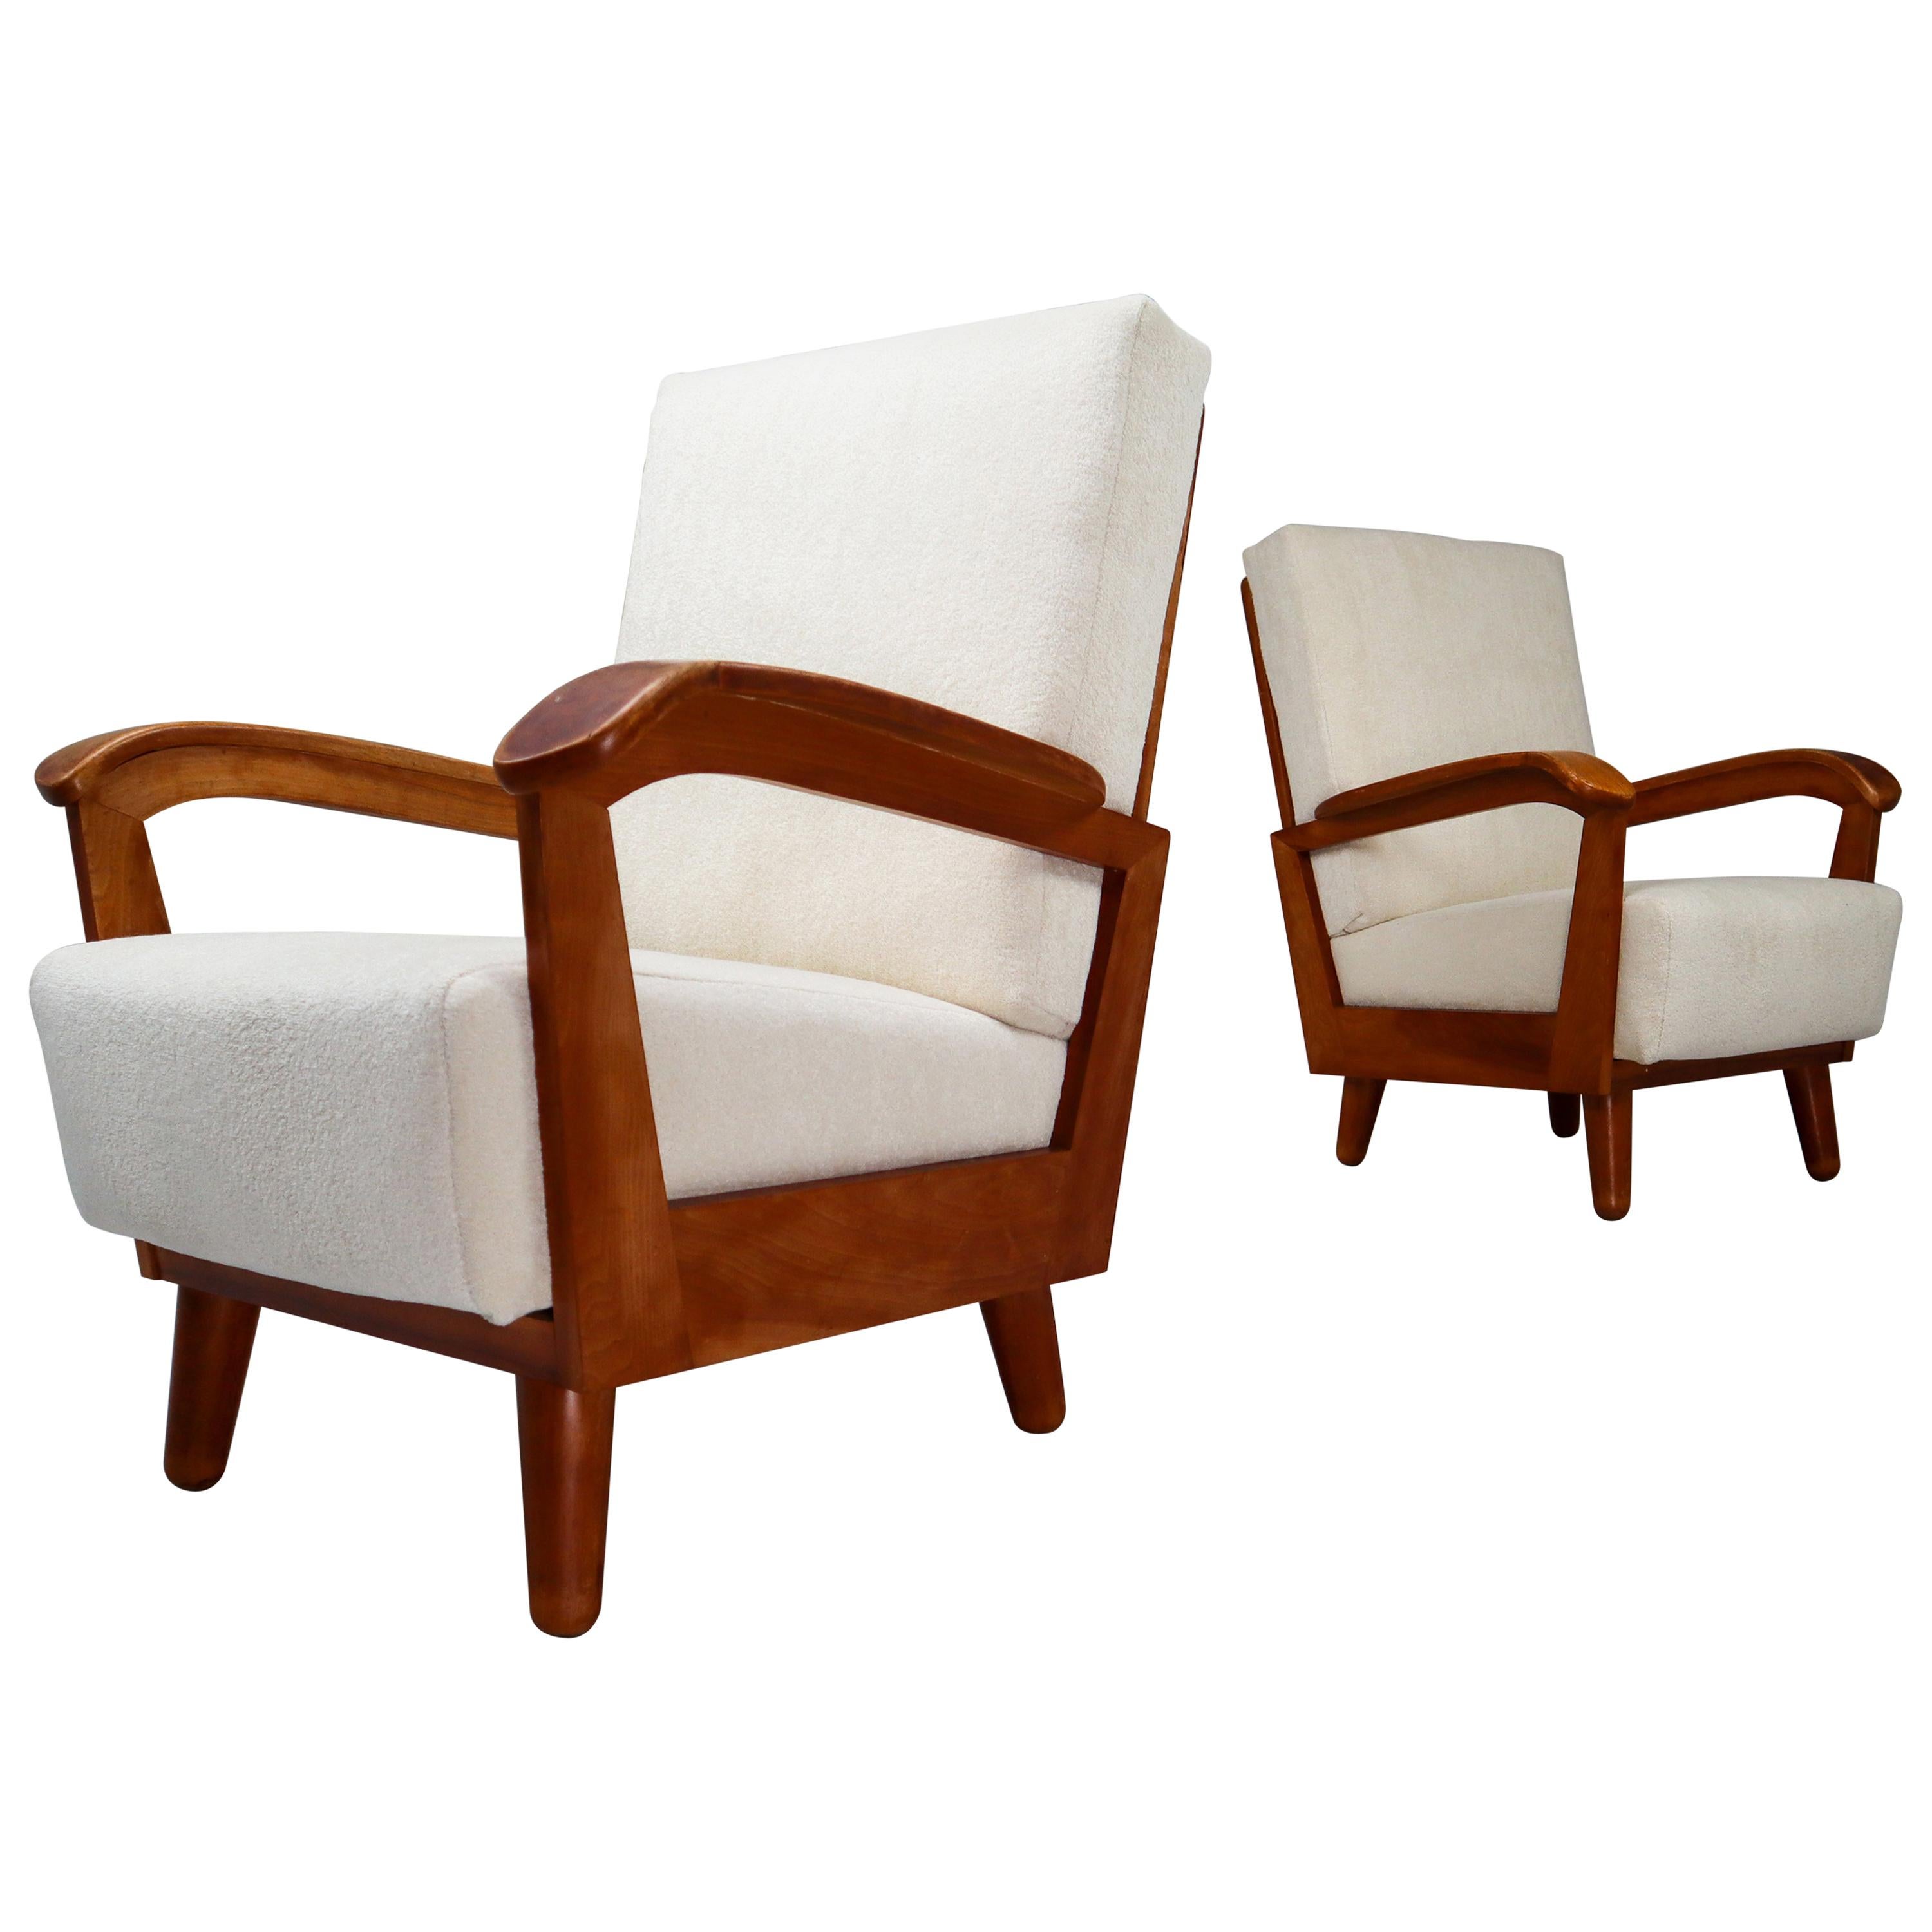 French Midcentury Armchairs in Walnut and Reupholstered in Off-White Wool Fabric